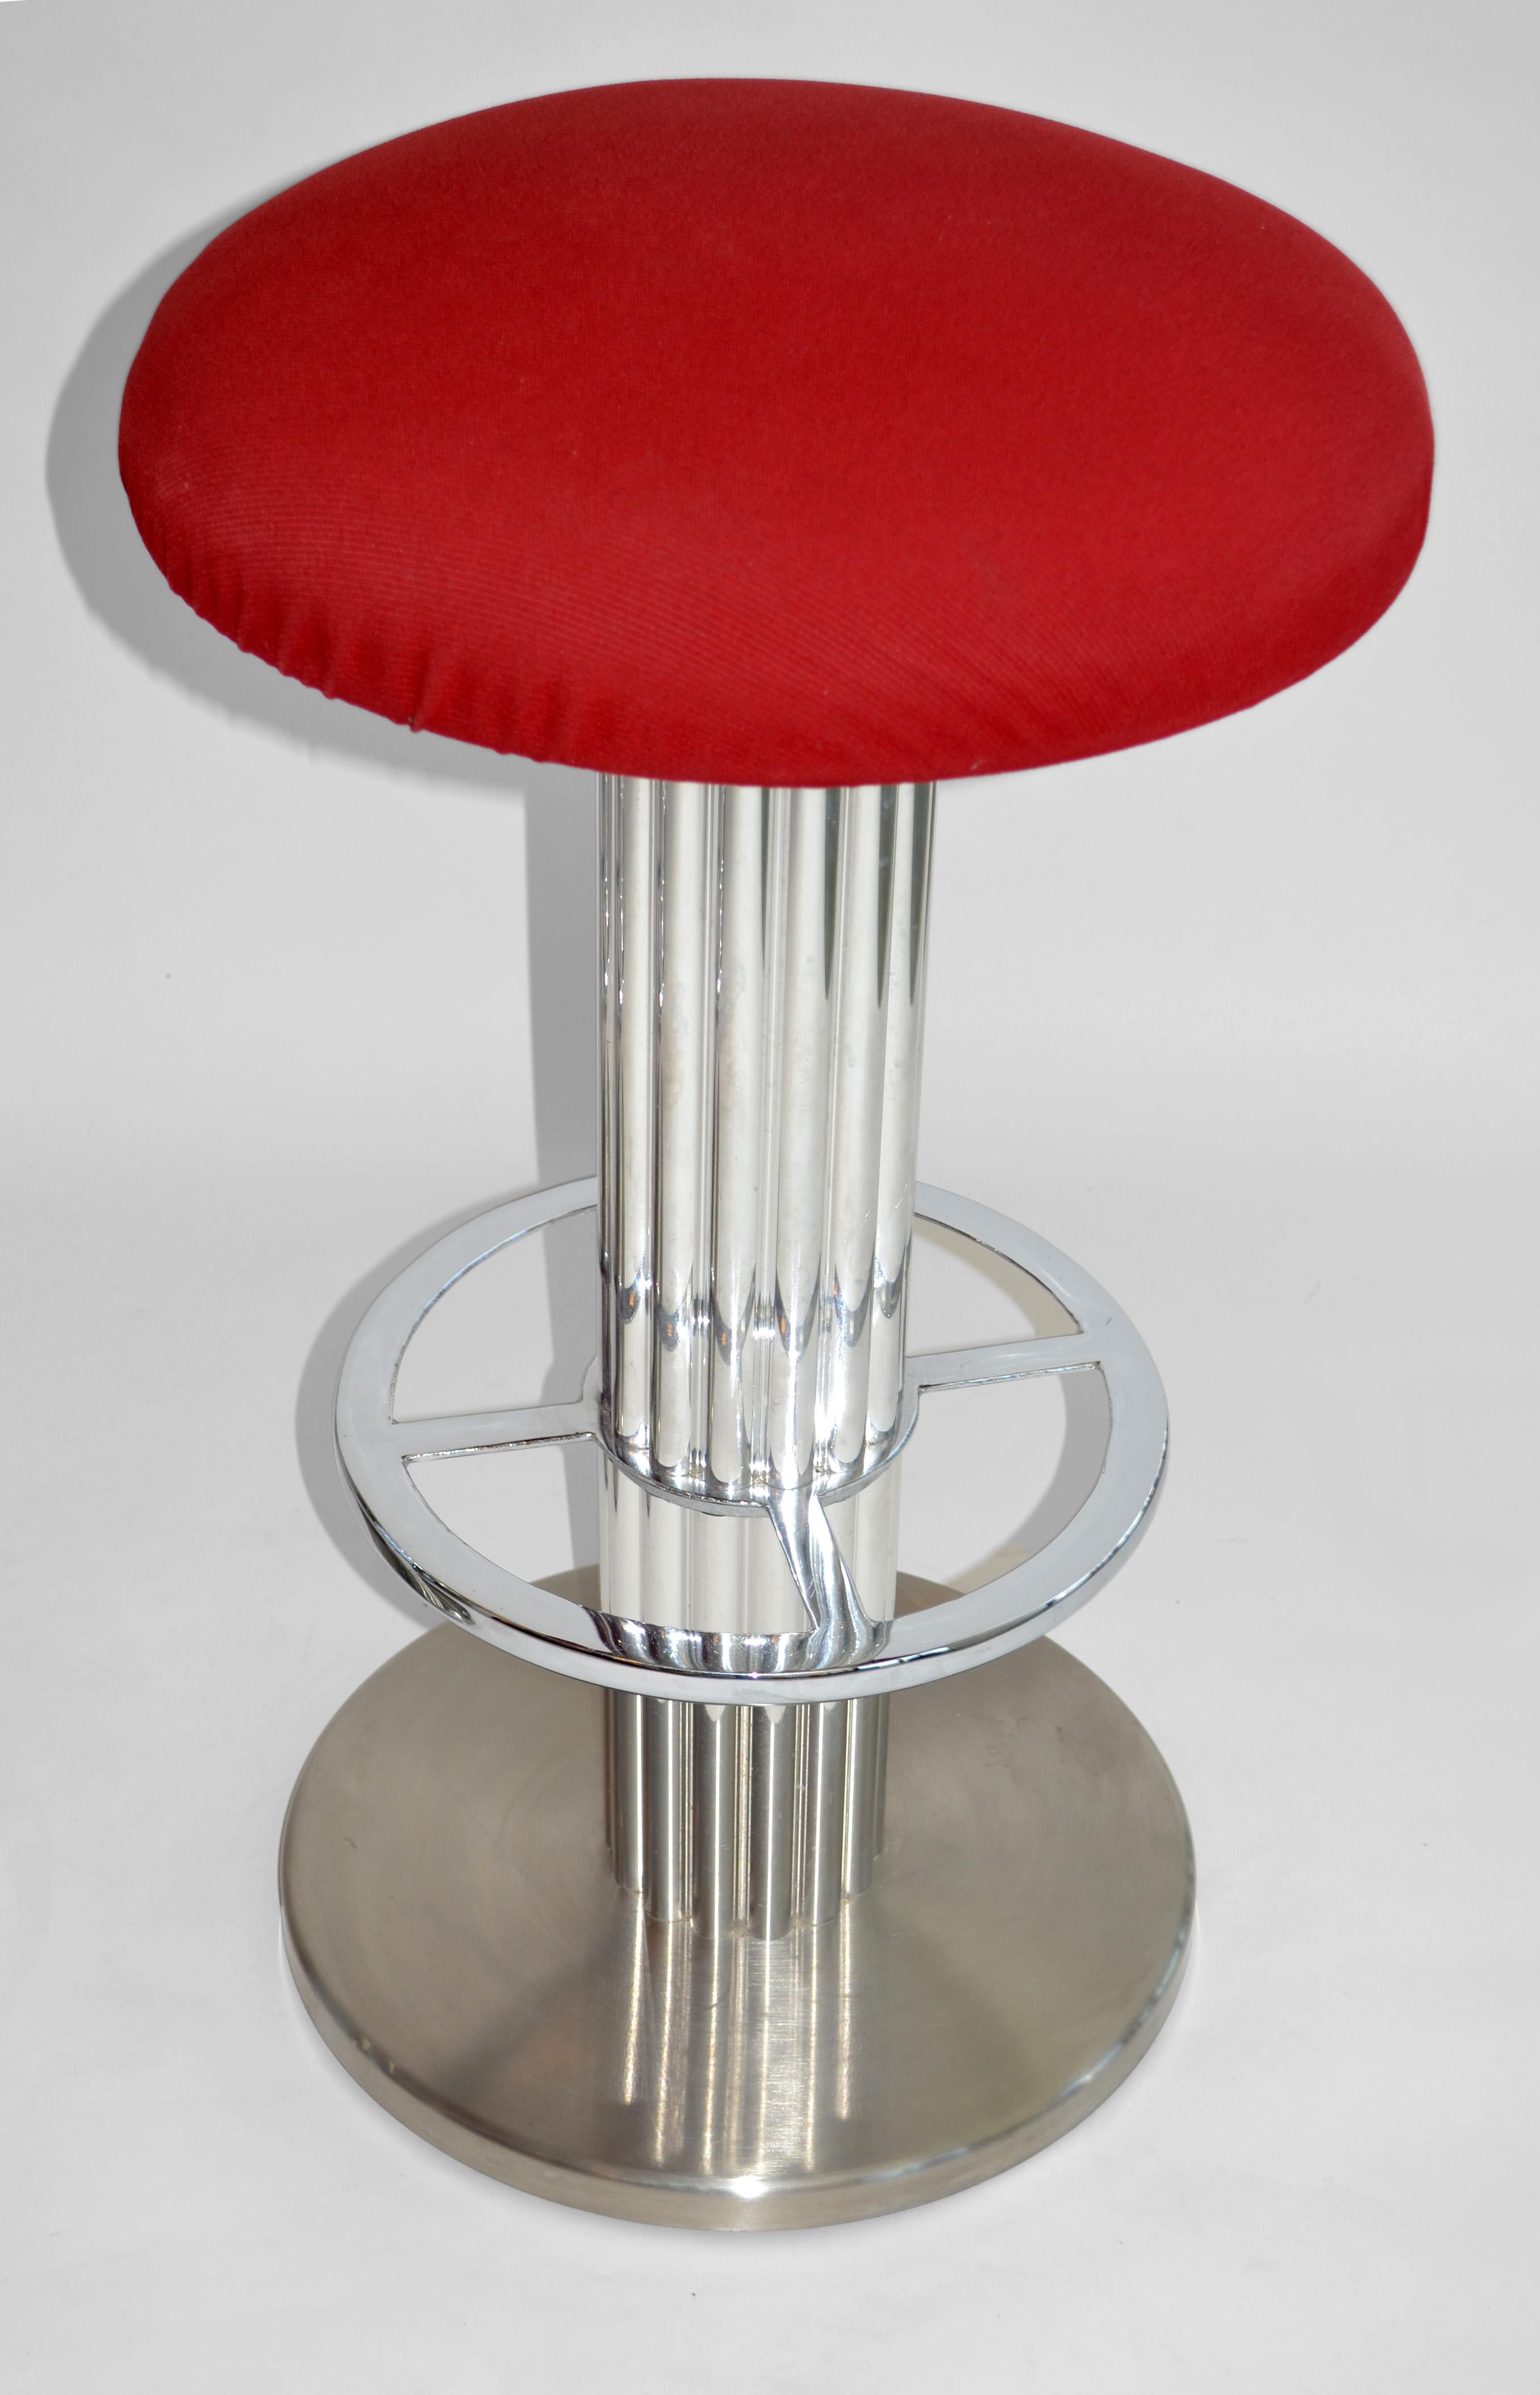 Set of Three Design For Leisure Modern Steel Bar or Counter Swivel Stools 1980s In Good Condition For Sale In Ft Lauderdale, FL